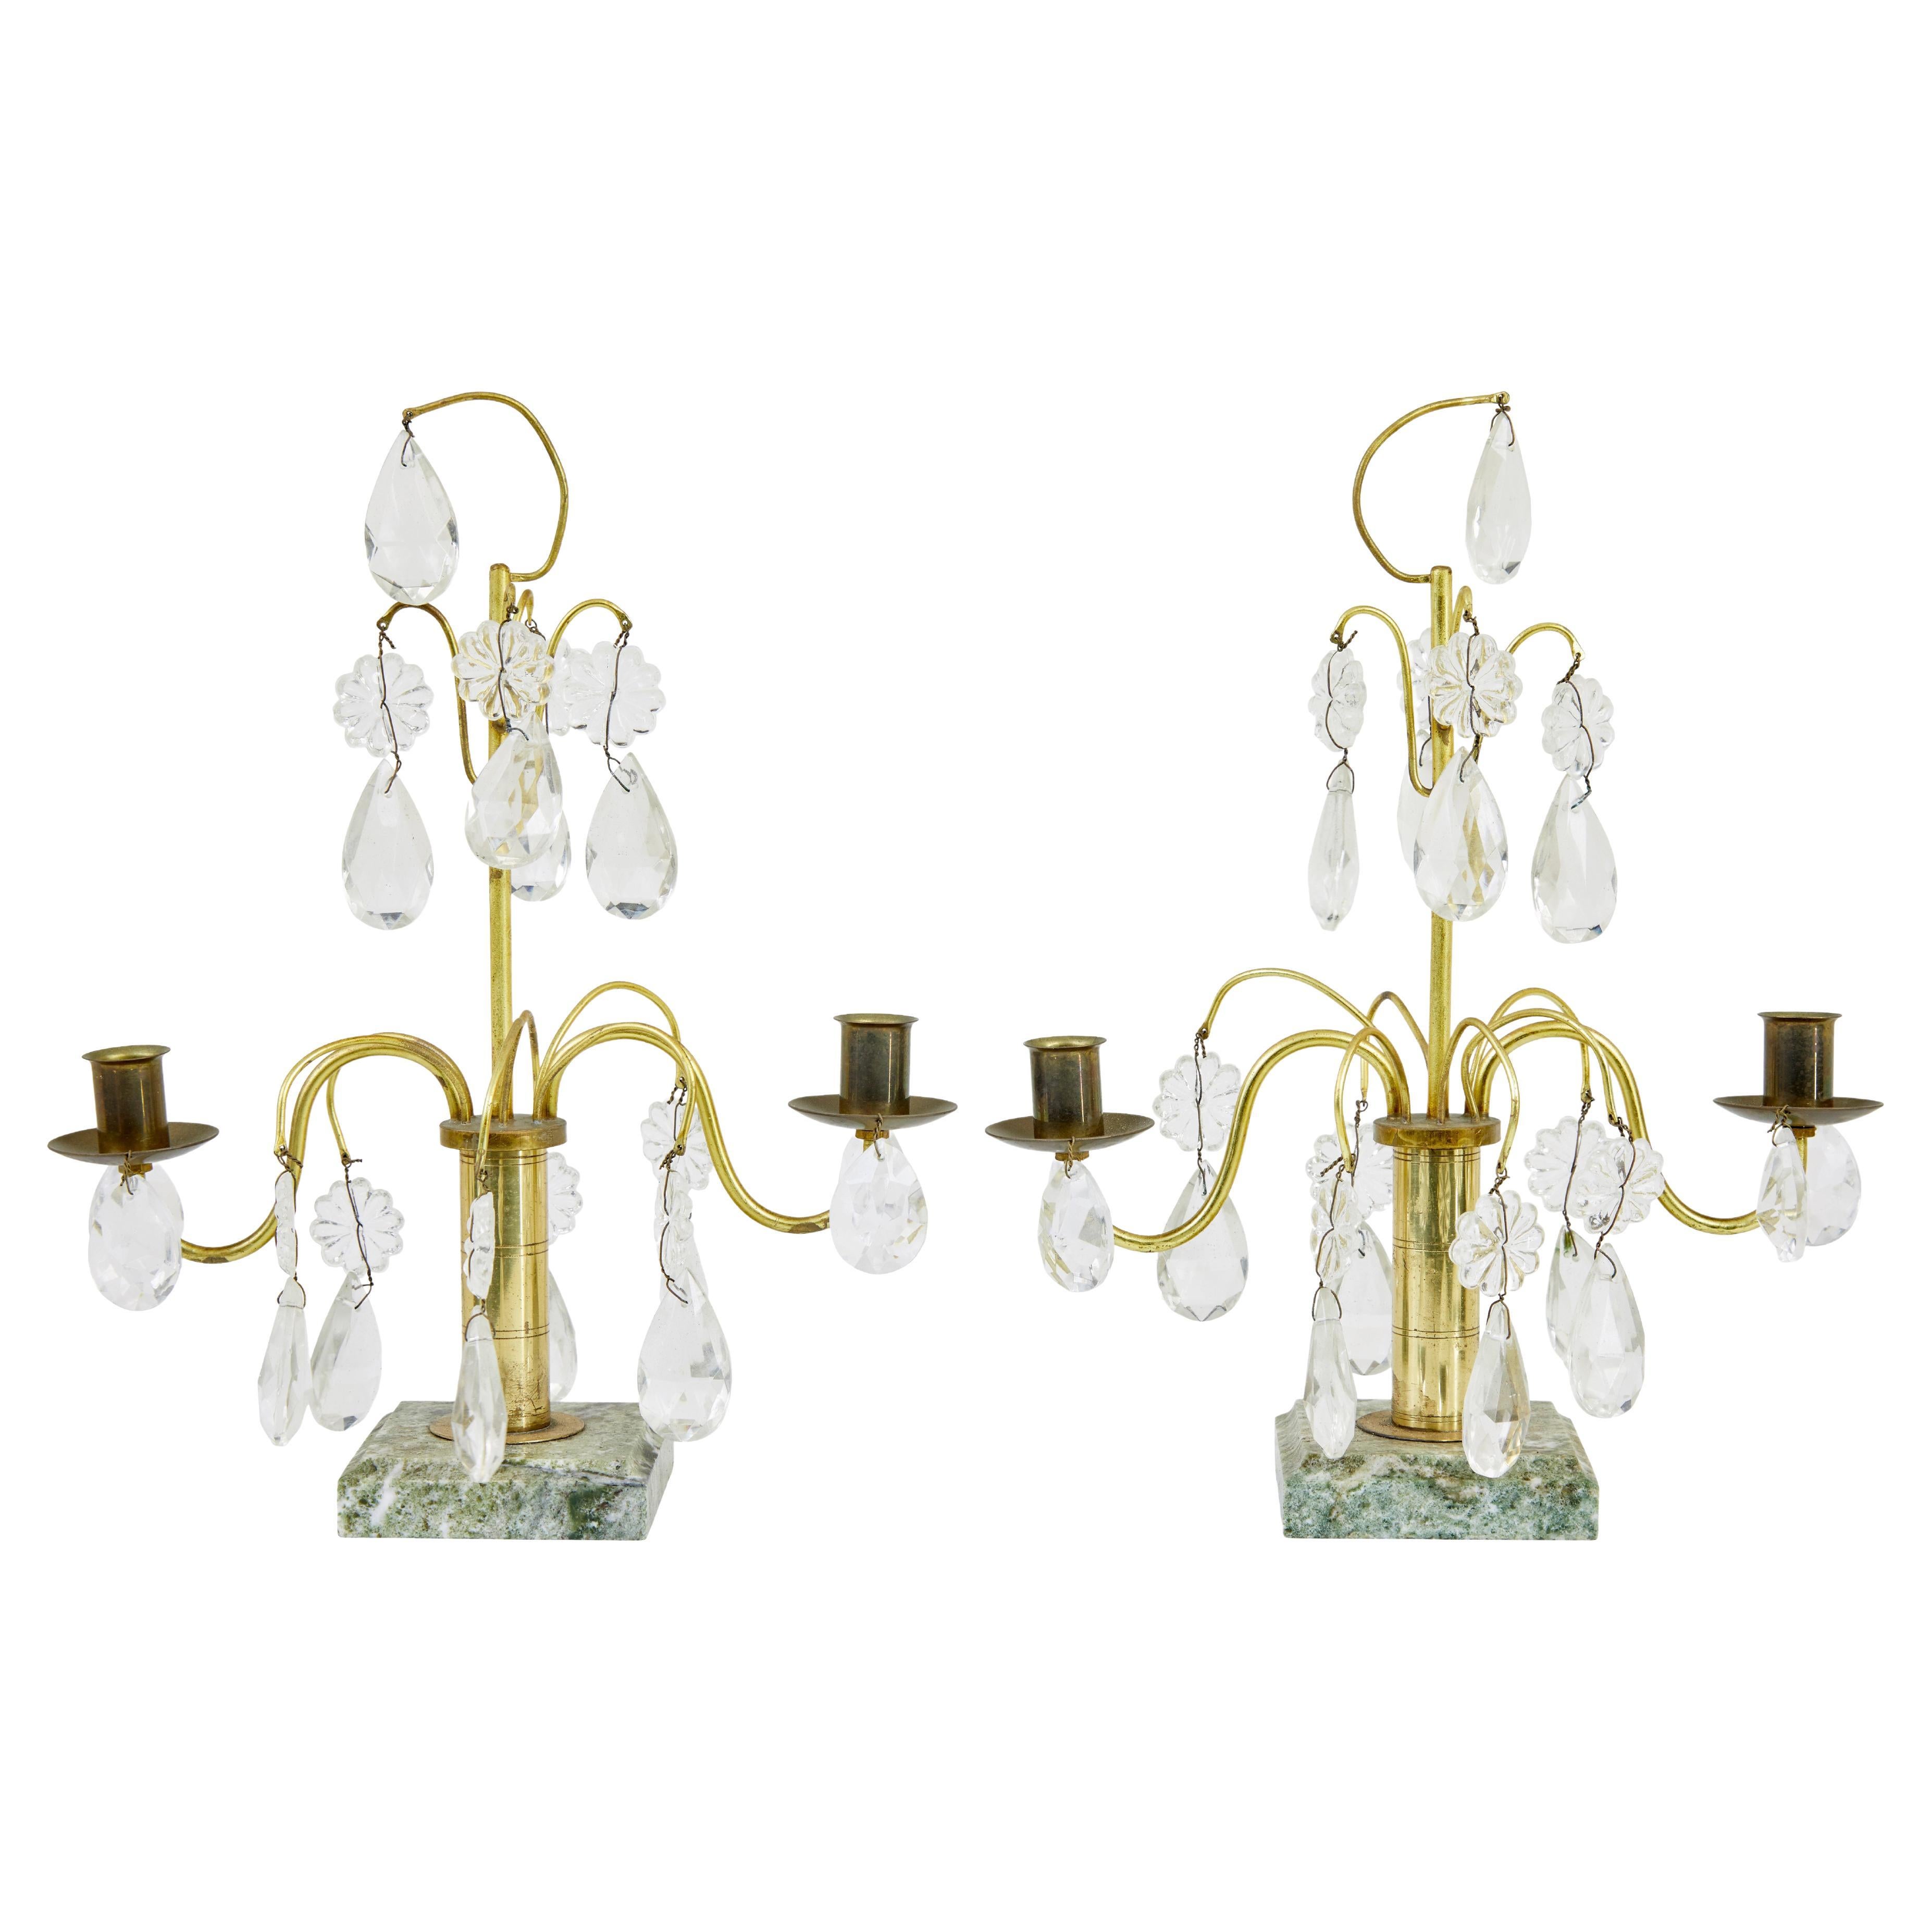 Ornate pair of mid century brass and cut glass decorative candlesticks